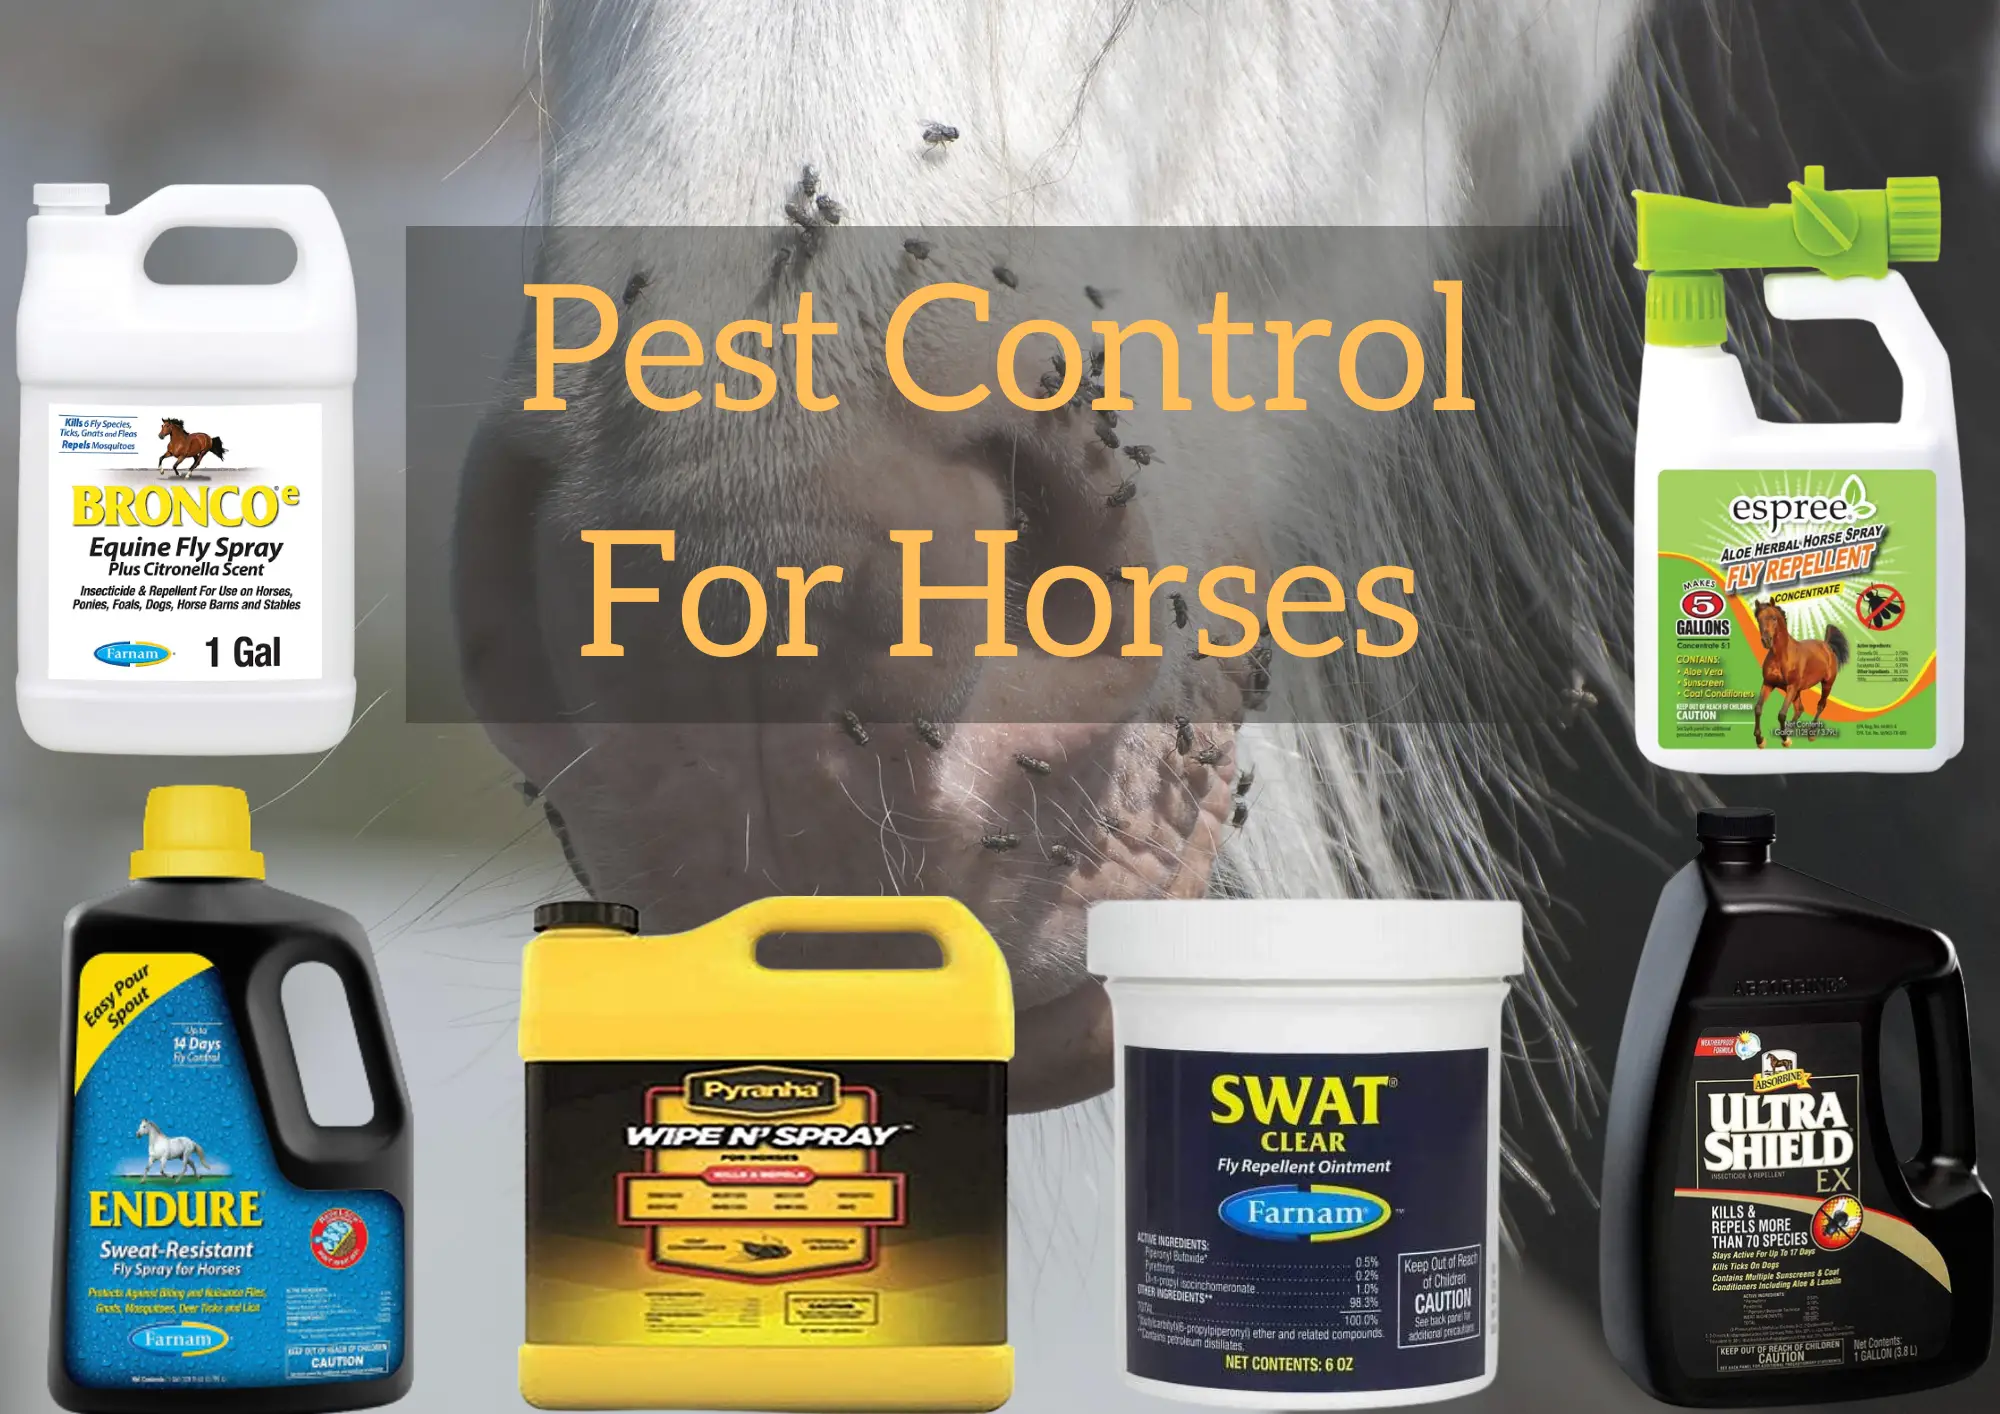 Pest Control For Horses